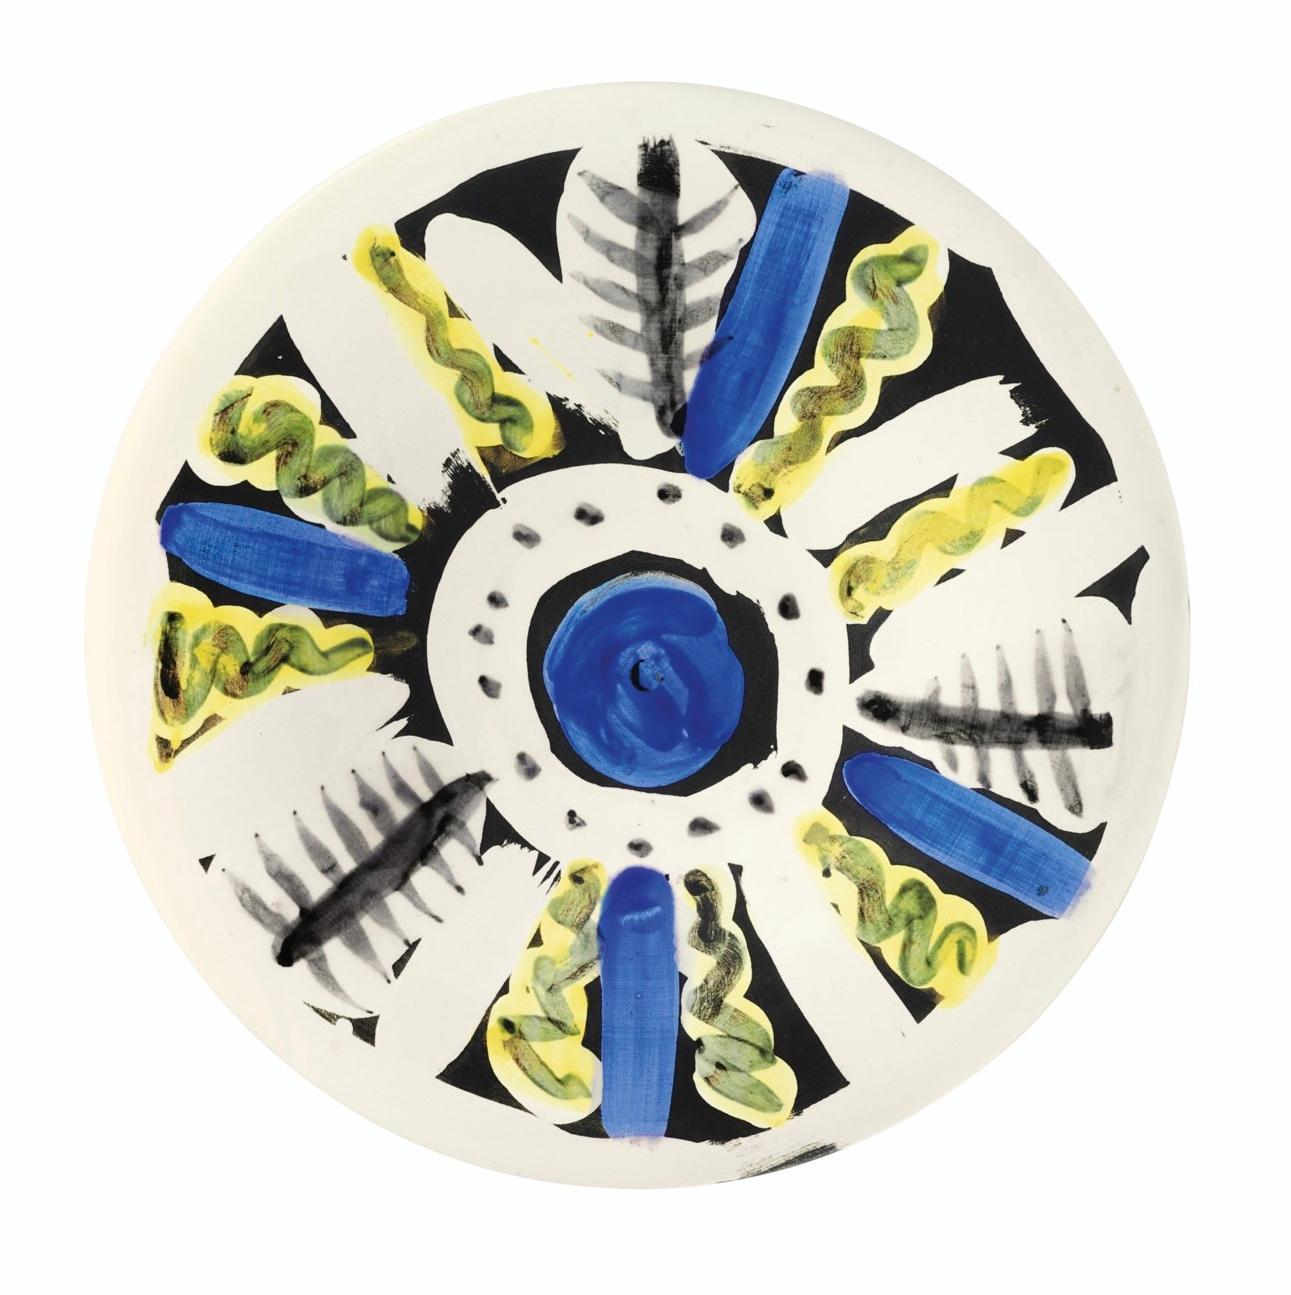 PABLO PICASSO (1881-1973) 
Motifs no. 66' (A. R. 472)

Terre de faïence plate, painted in colors and partially glazed, 1963, numbered 94/150 and inscribed 'No 66', 'Edition Picasso' and 'Madoura'.
